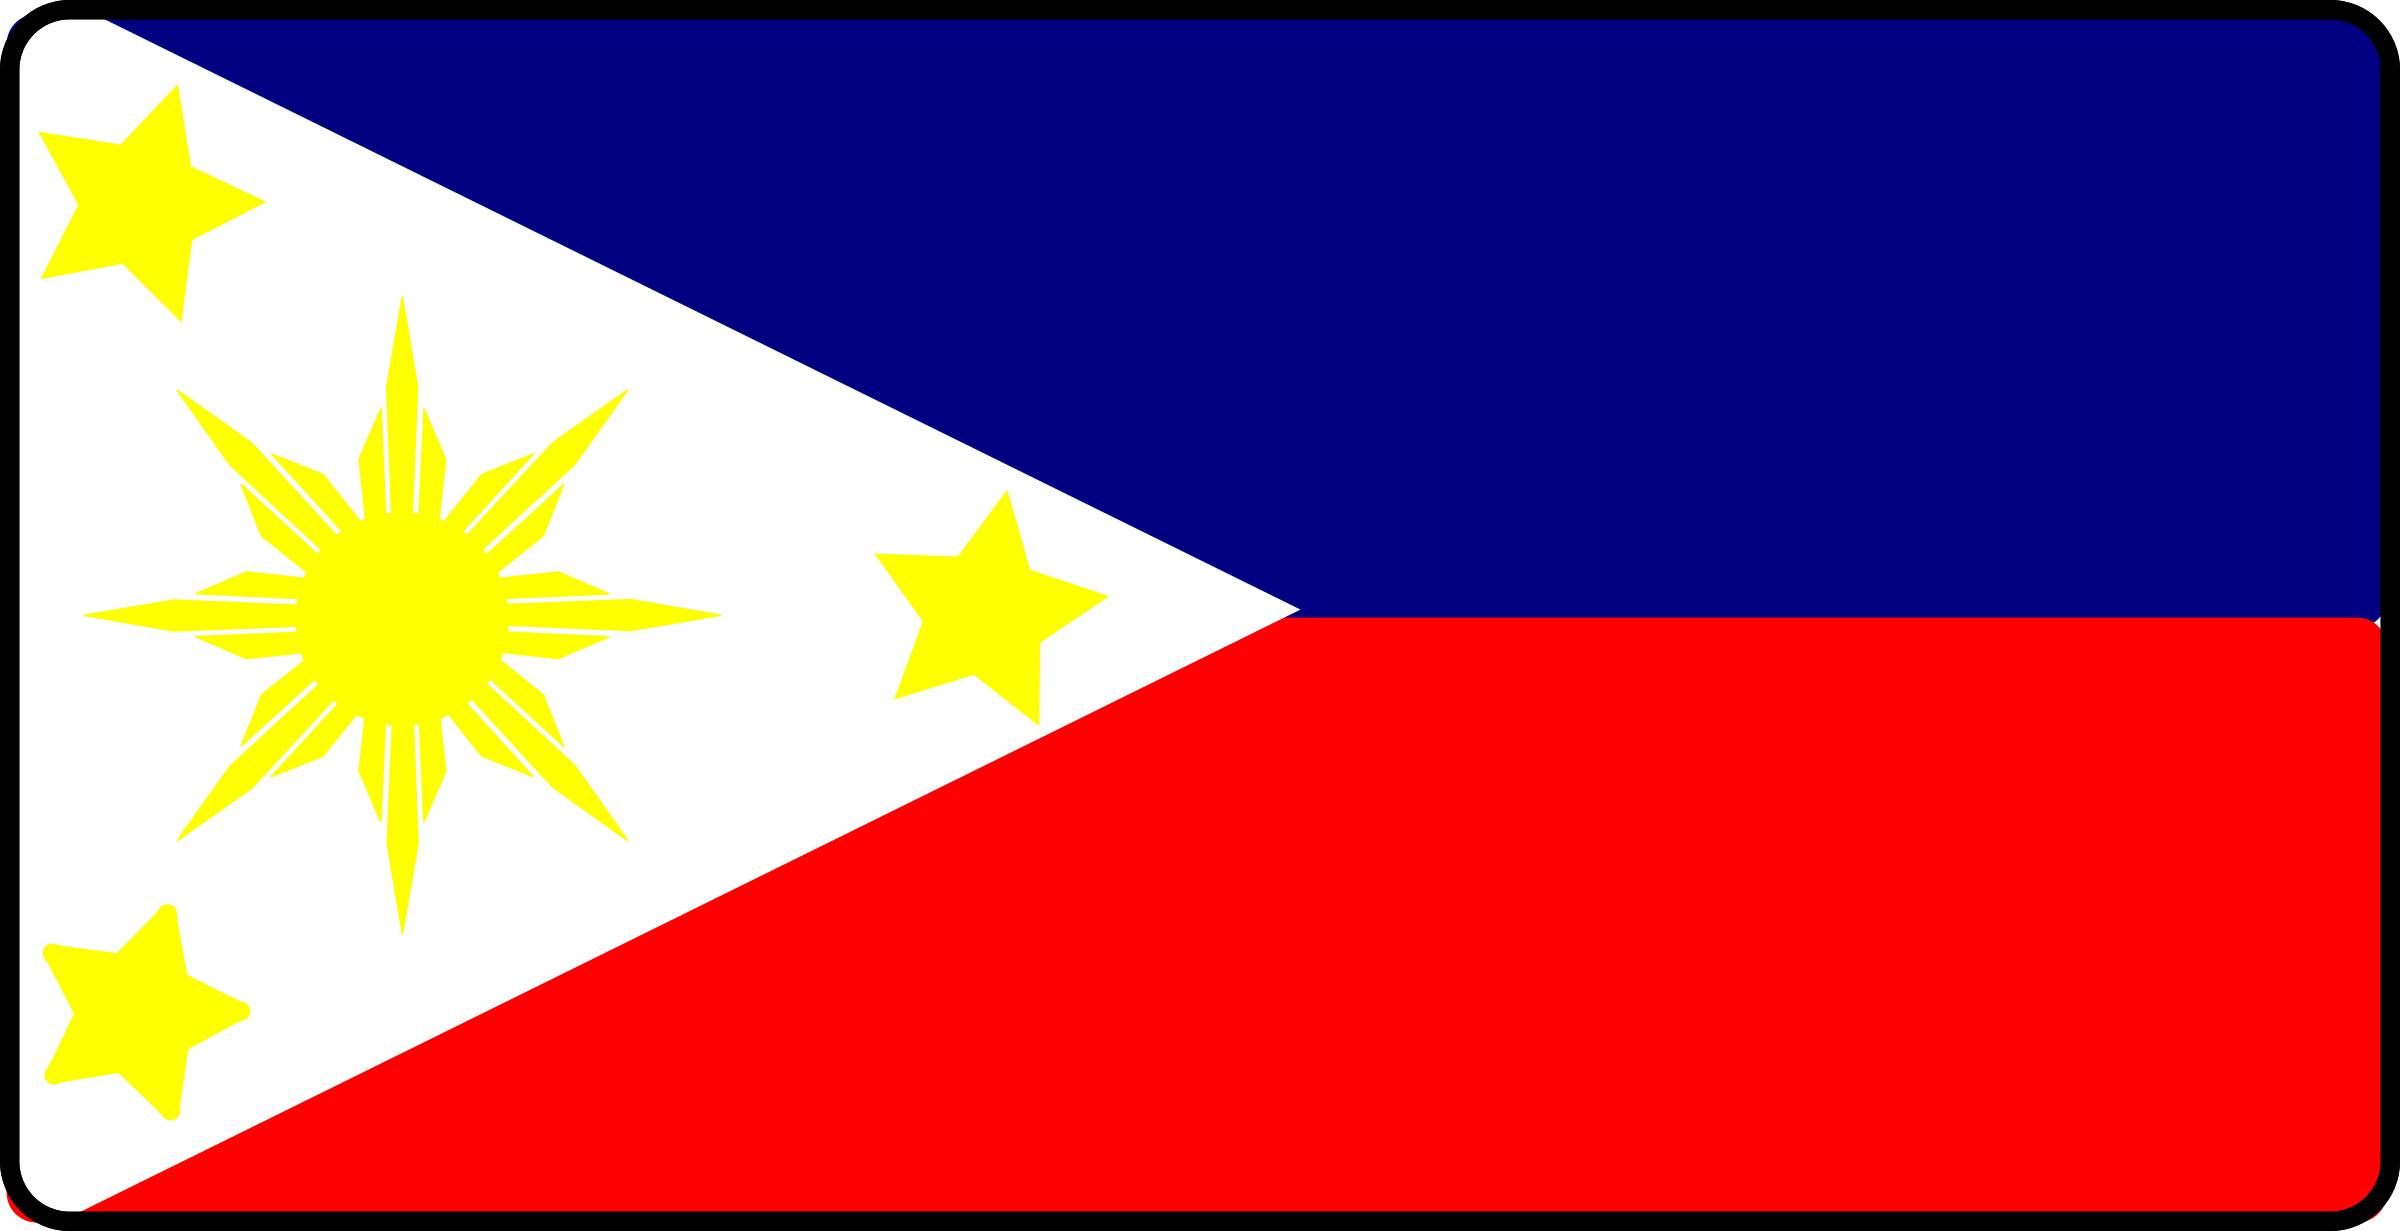 philippine-flag-wallpaper-hd-67-images